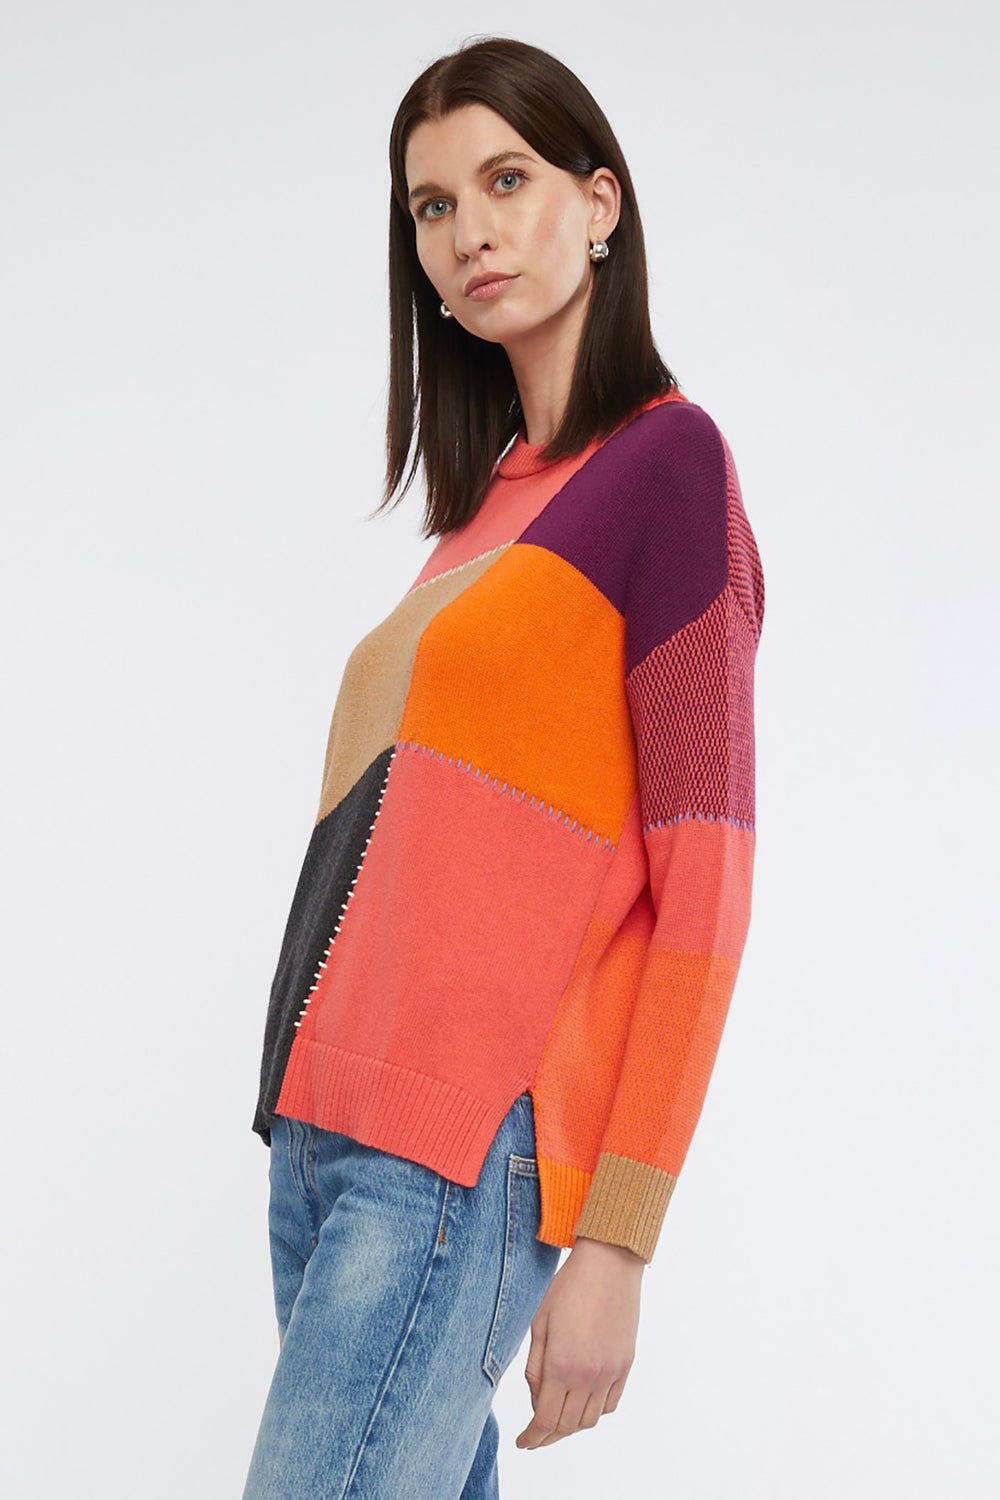 patchwork jumper in dubarry by Zaket & Plover side view